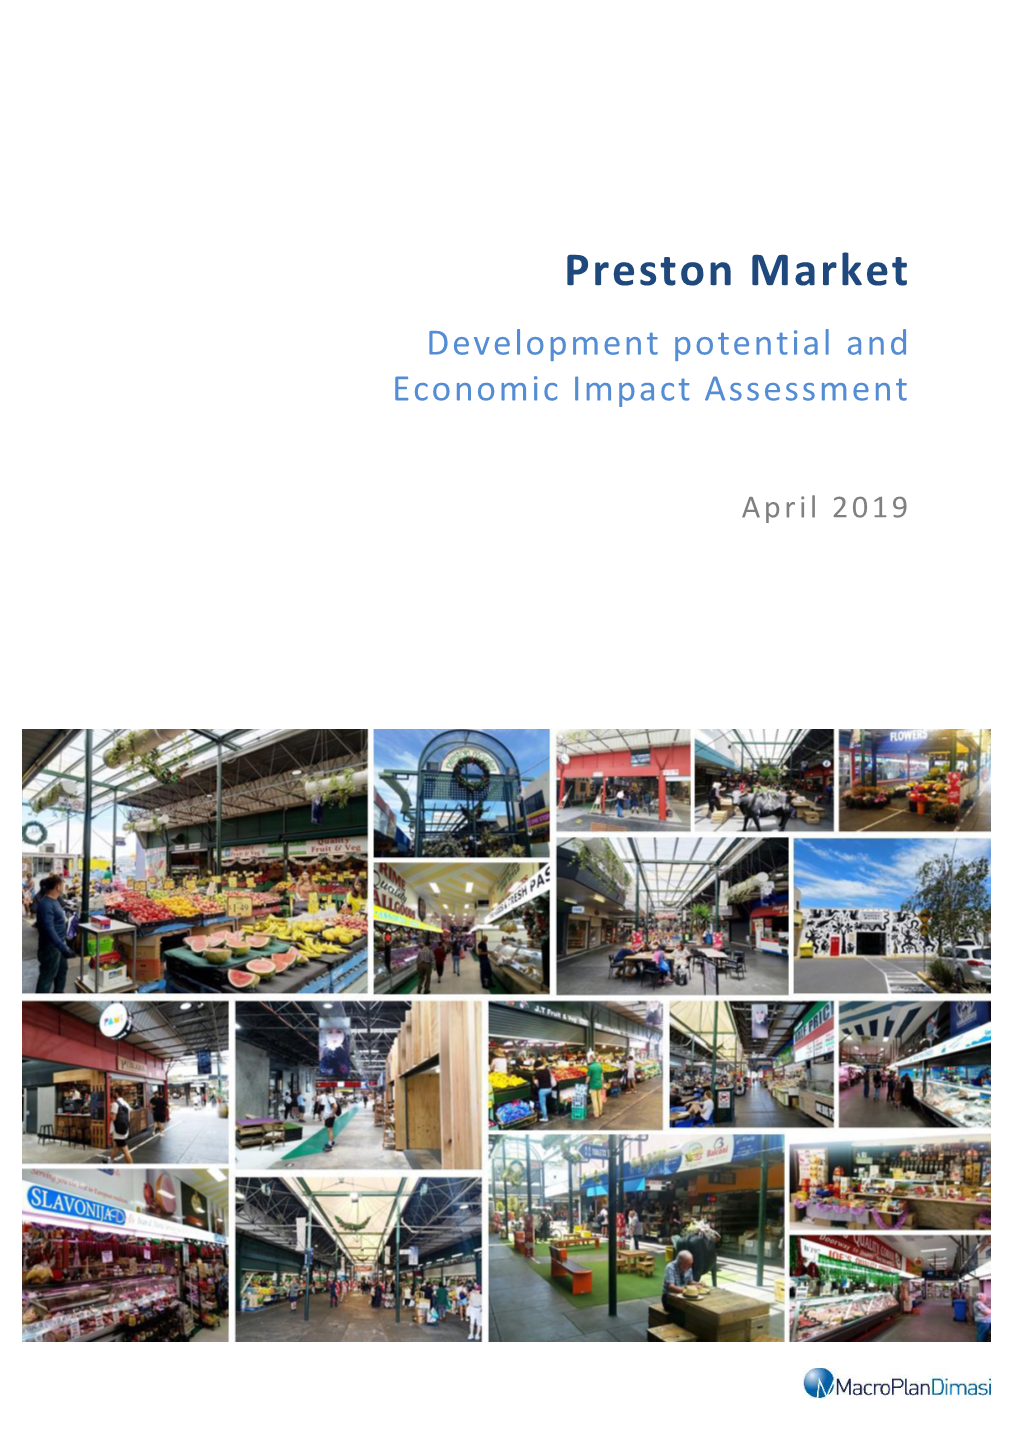 Preston Market Precinct Can Support Around 1,000 – 1,100 Additional Ongoing Jobs, Or Around 1,400 Ongoing Jobs Including Existing Jobs on Site